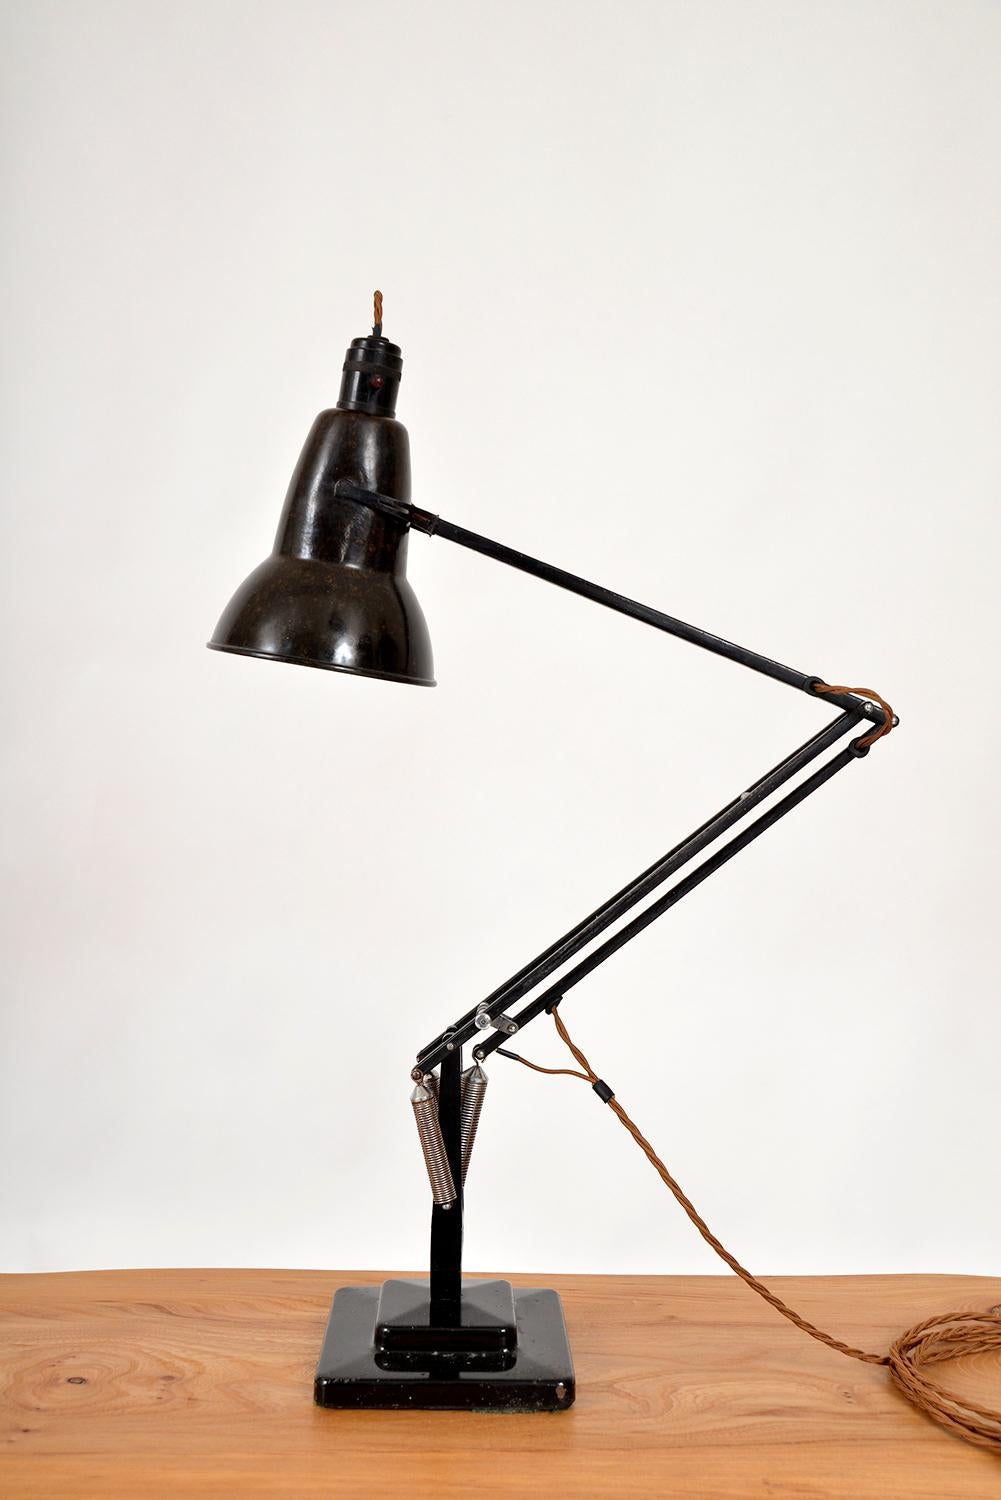 Designed by George Carwardine in 1935 as a task lamp with flexibility and stability in mind, this early two-step 1227 Anglepoise desk lamp made by Herbert Terry & Sons, England, is fitted with its original and very rare rolled rim Bakelite shade and